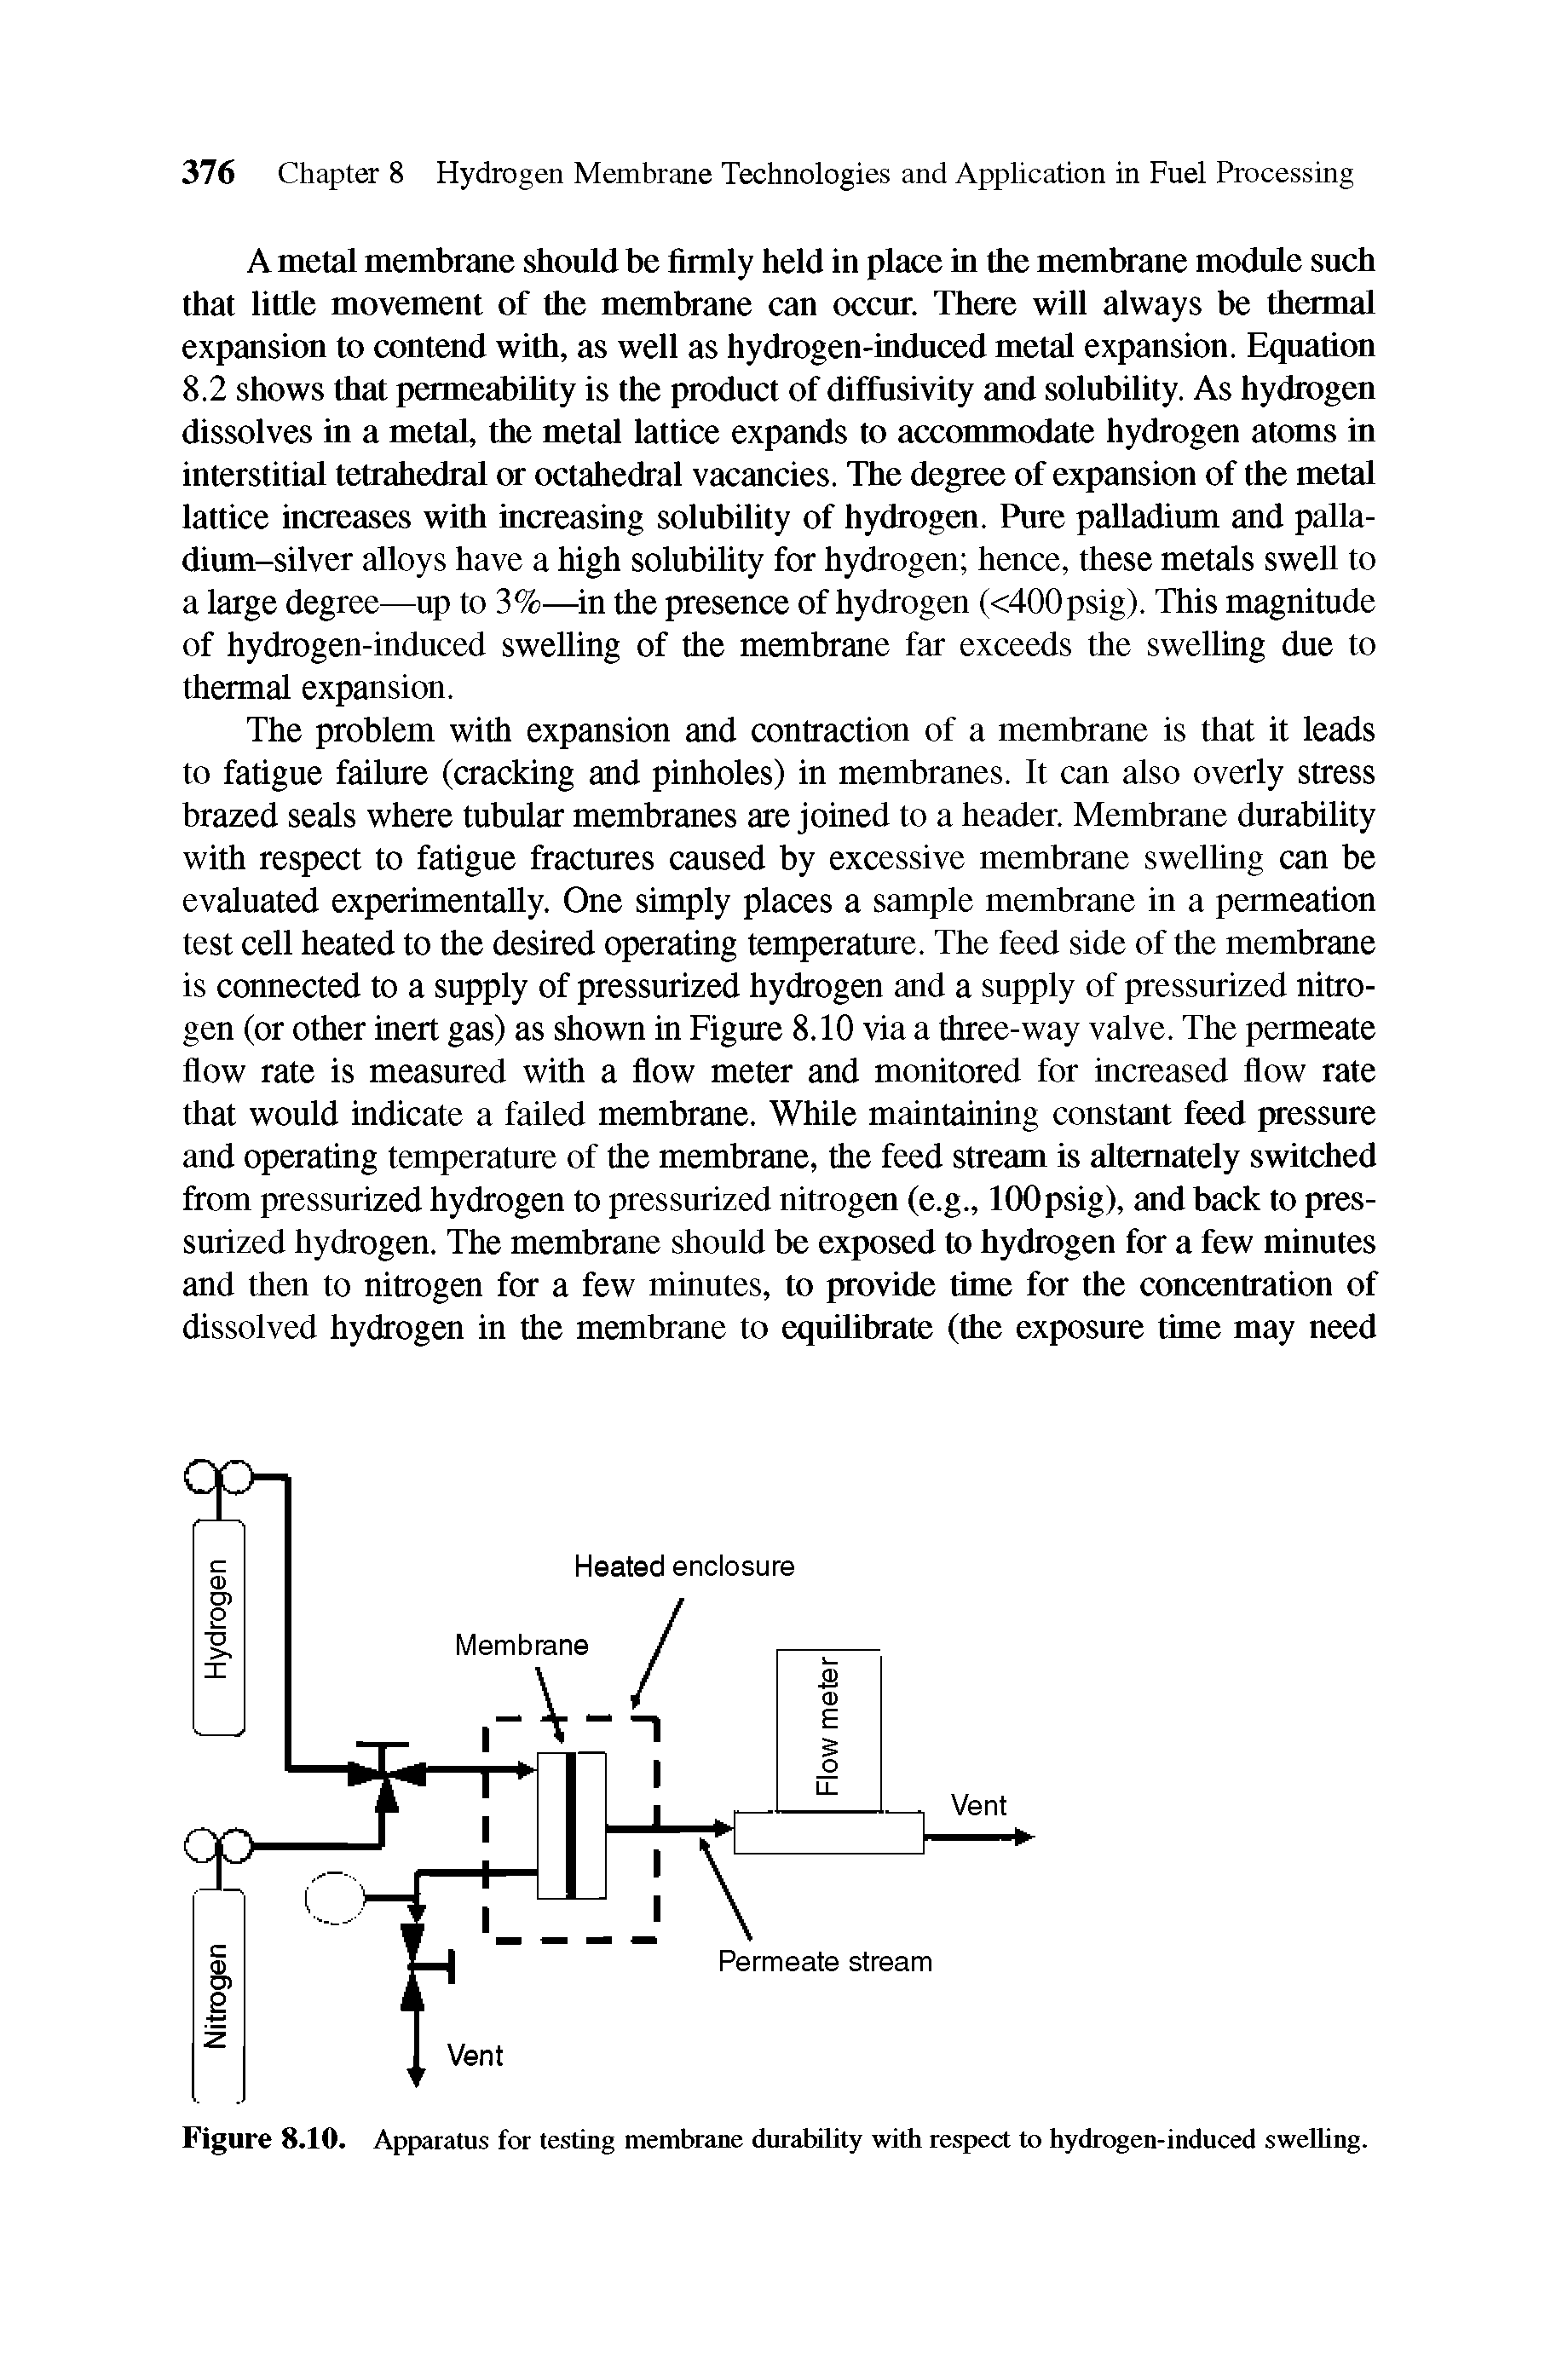 Figure 8.10. Apparatus for testing membrane durability with respect to hydrogen-induced swelhng.